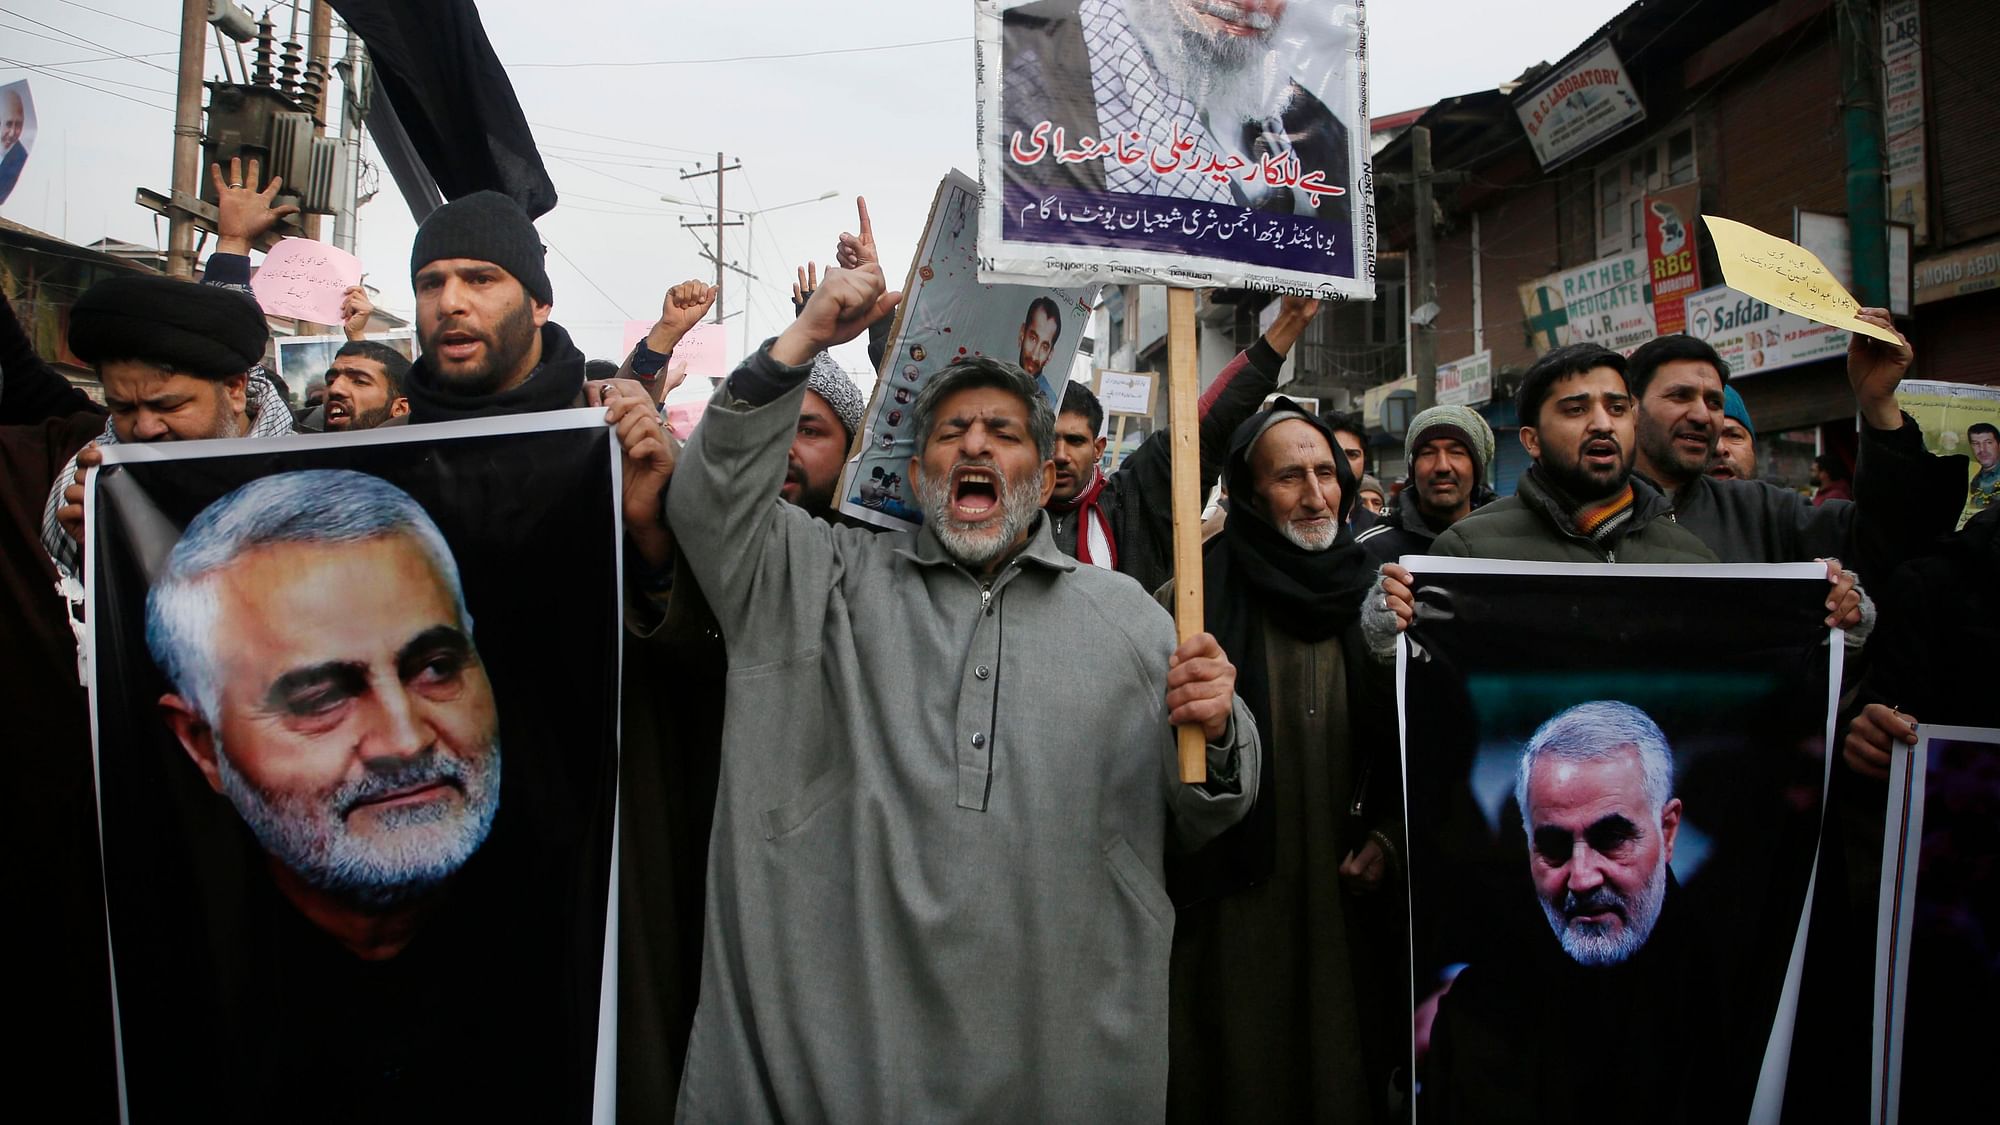 Kashmiri Shiite Muslims shout anti American and anti Israel slogans during a protest against US airstrike in Iraq that killed Qassem Soleimani. Image used for representational purposes.